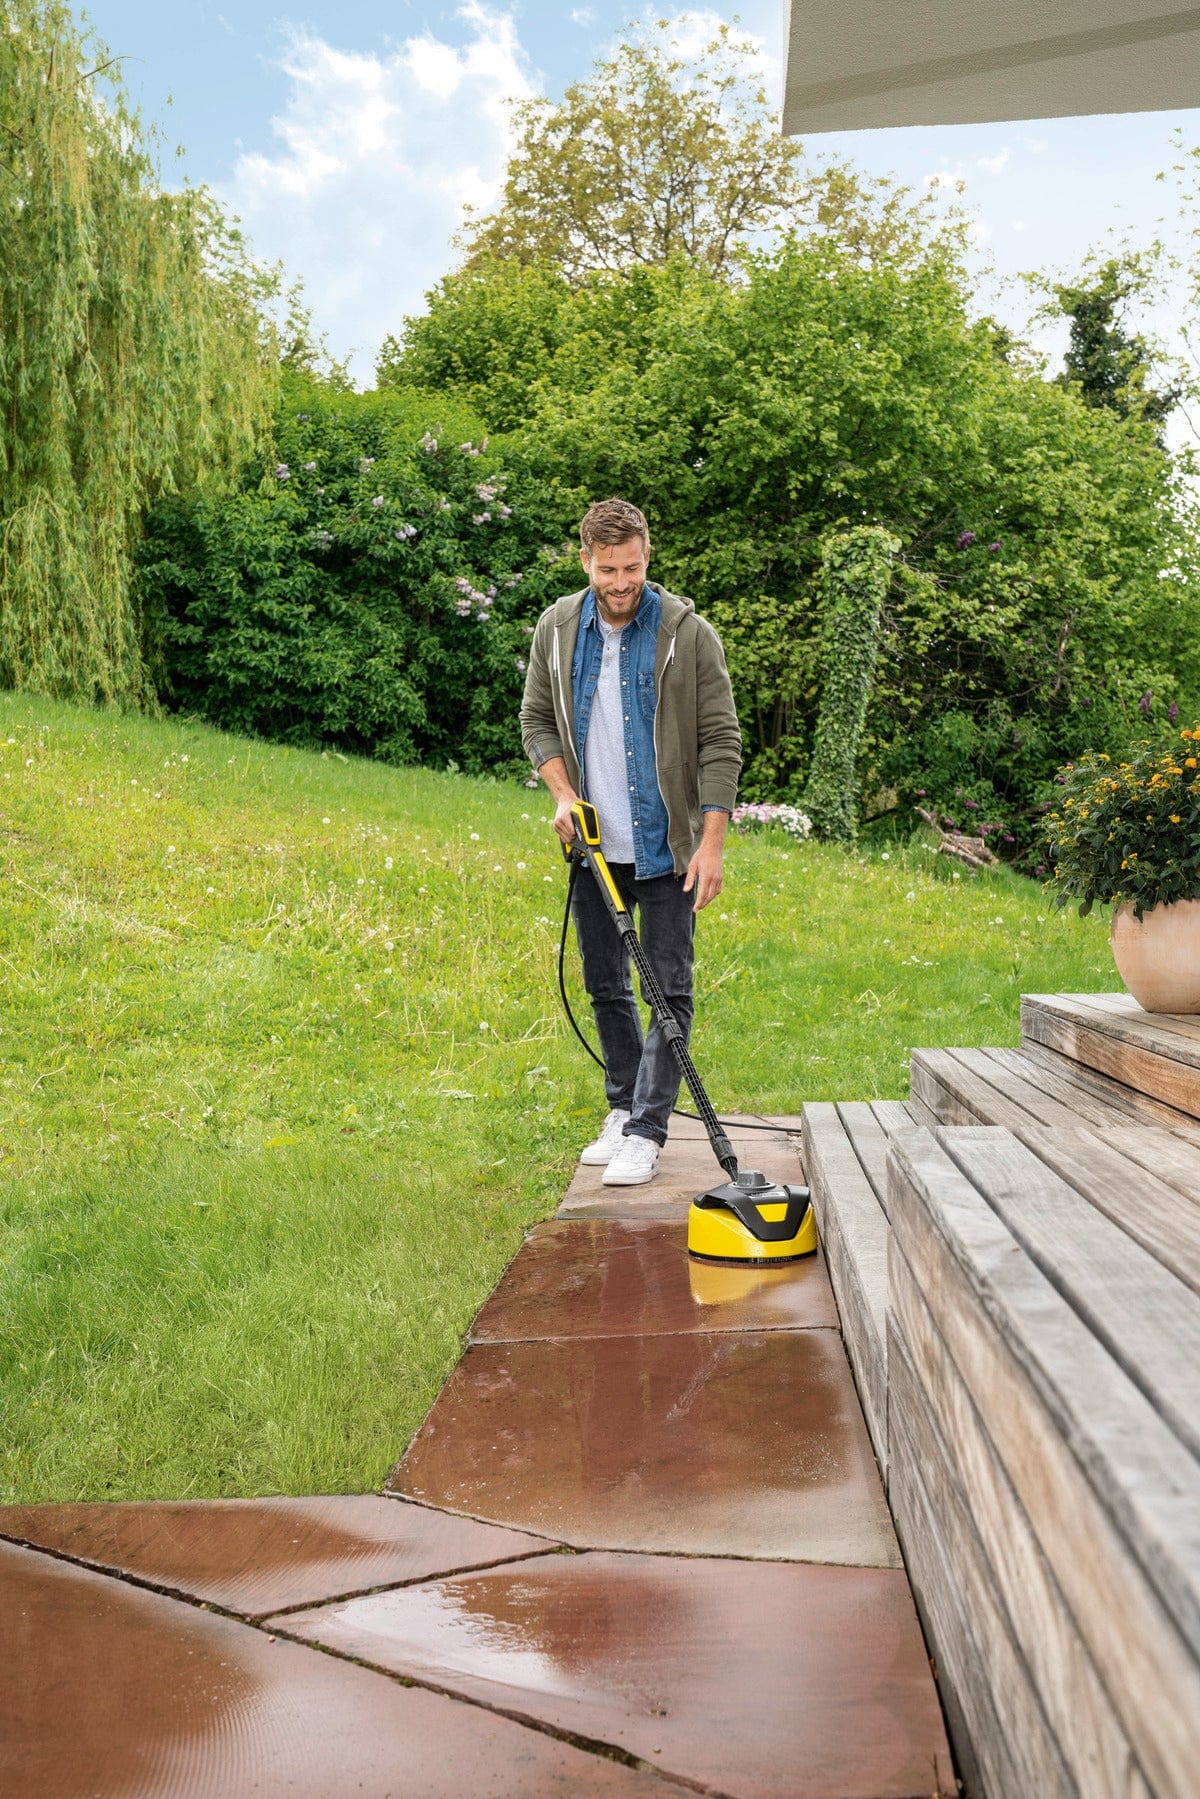 Karcher T-Racer Surface Cleaner - T5 | Supply Master | Accra, Ghana Pressure Washer Buy Tools hardware Building materials